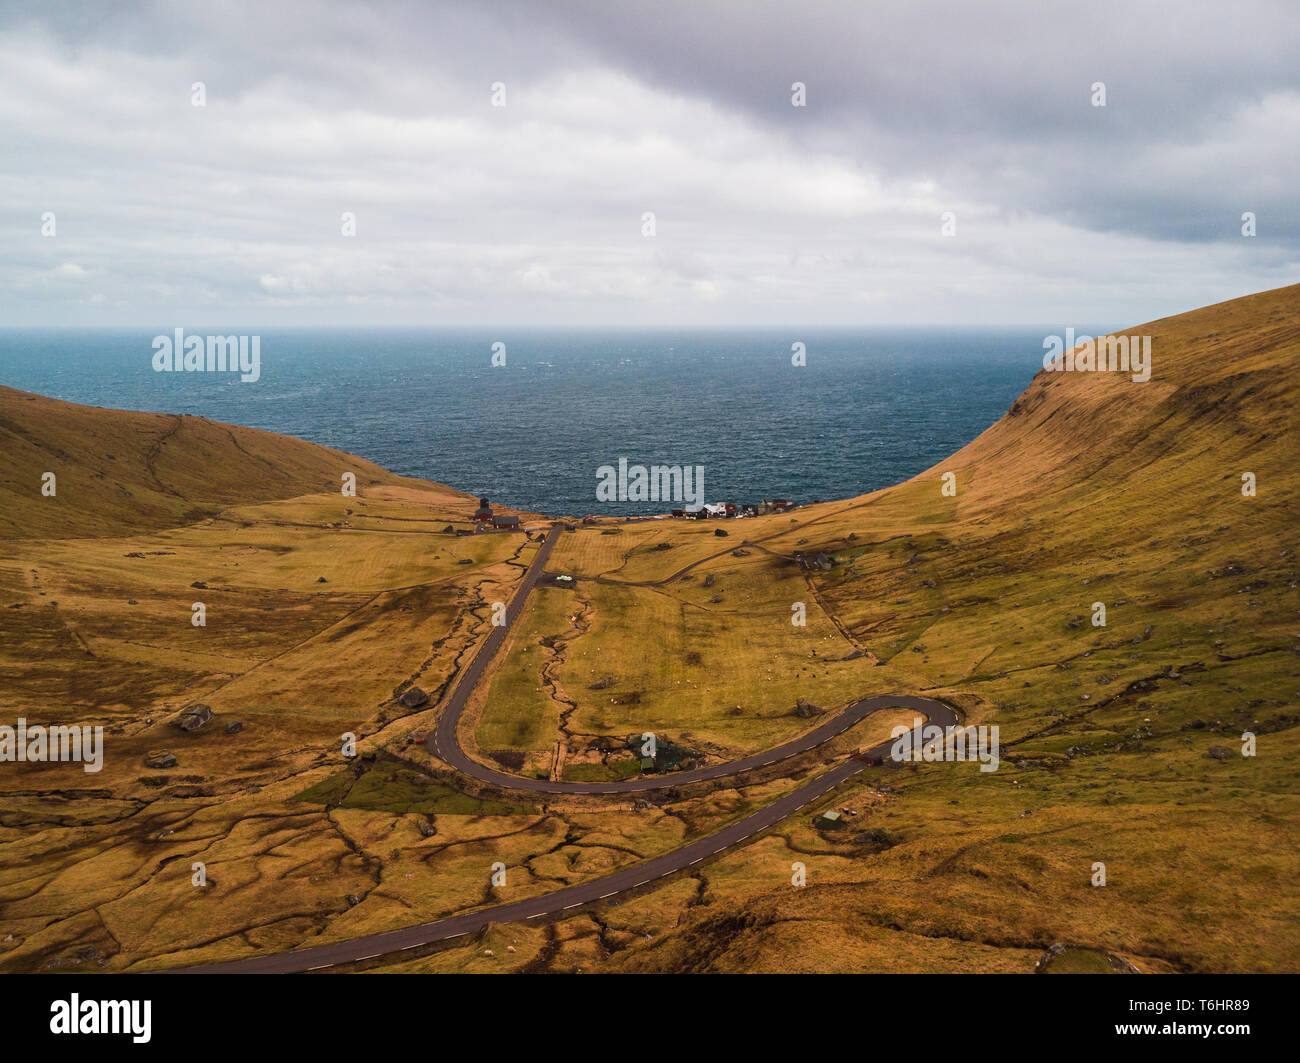 Aerial view of the small village Trøllanes on Kalsoy island with the turquoise Atlantic ocean as background (Faroe Islands, Denmark, Europe) Stock Photo